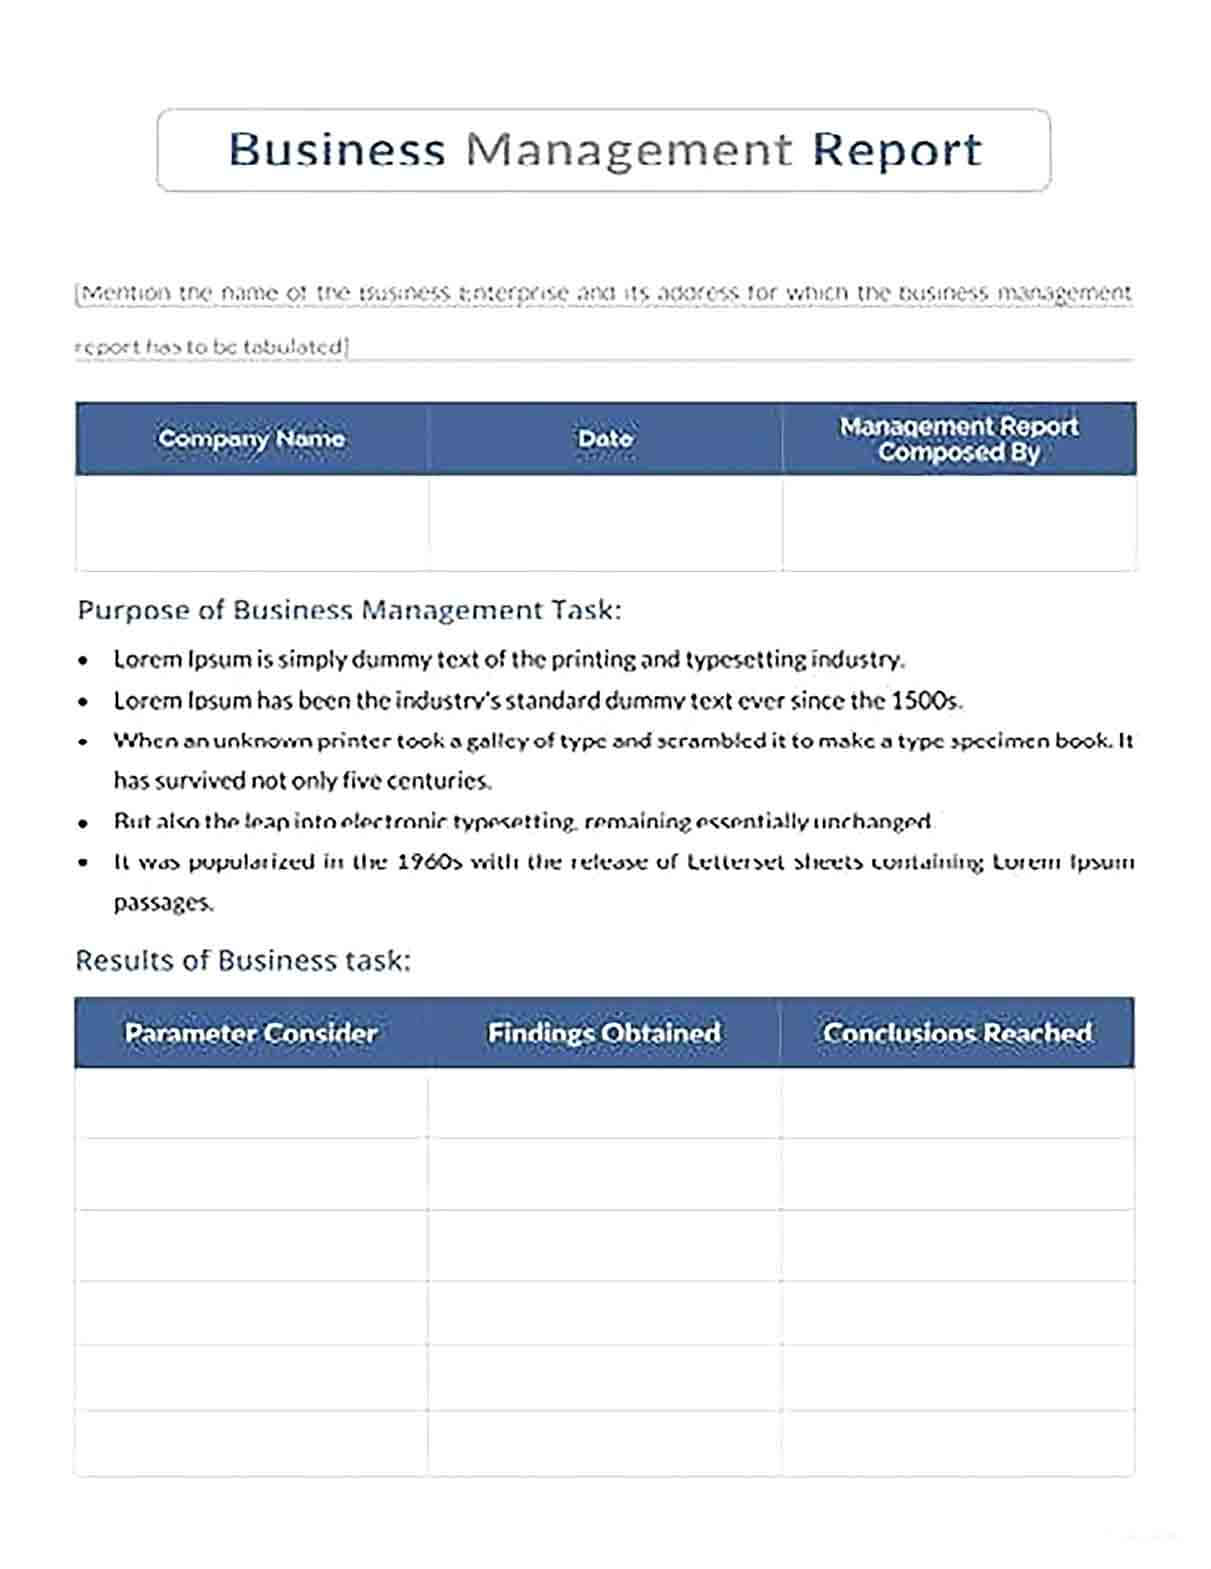 Sample business management report 1 440x622 1